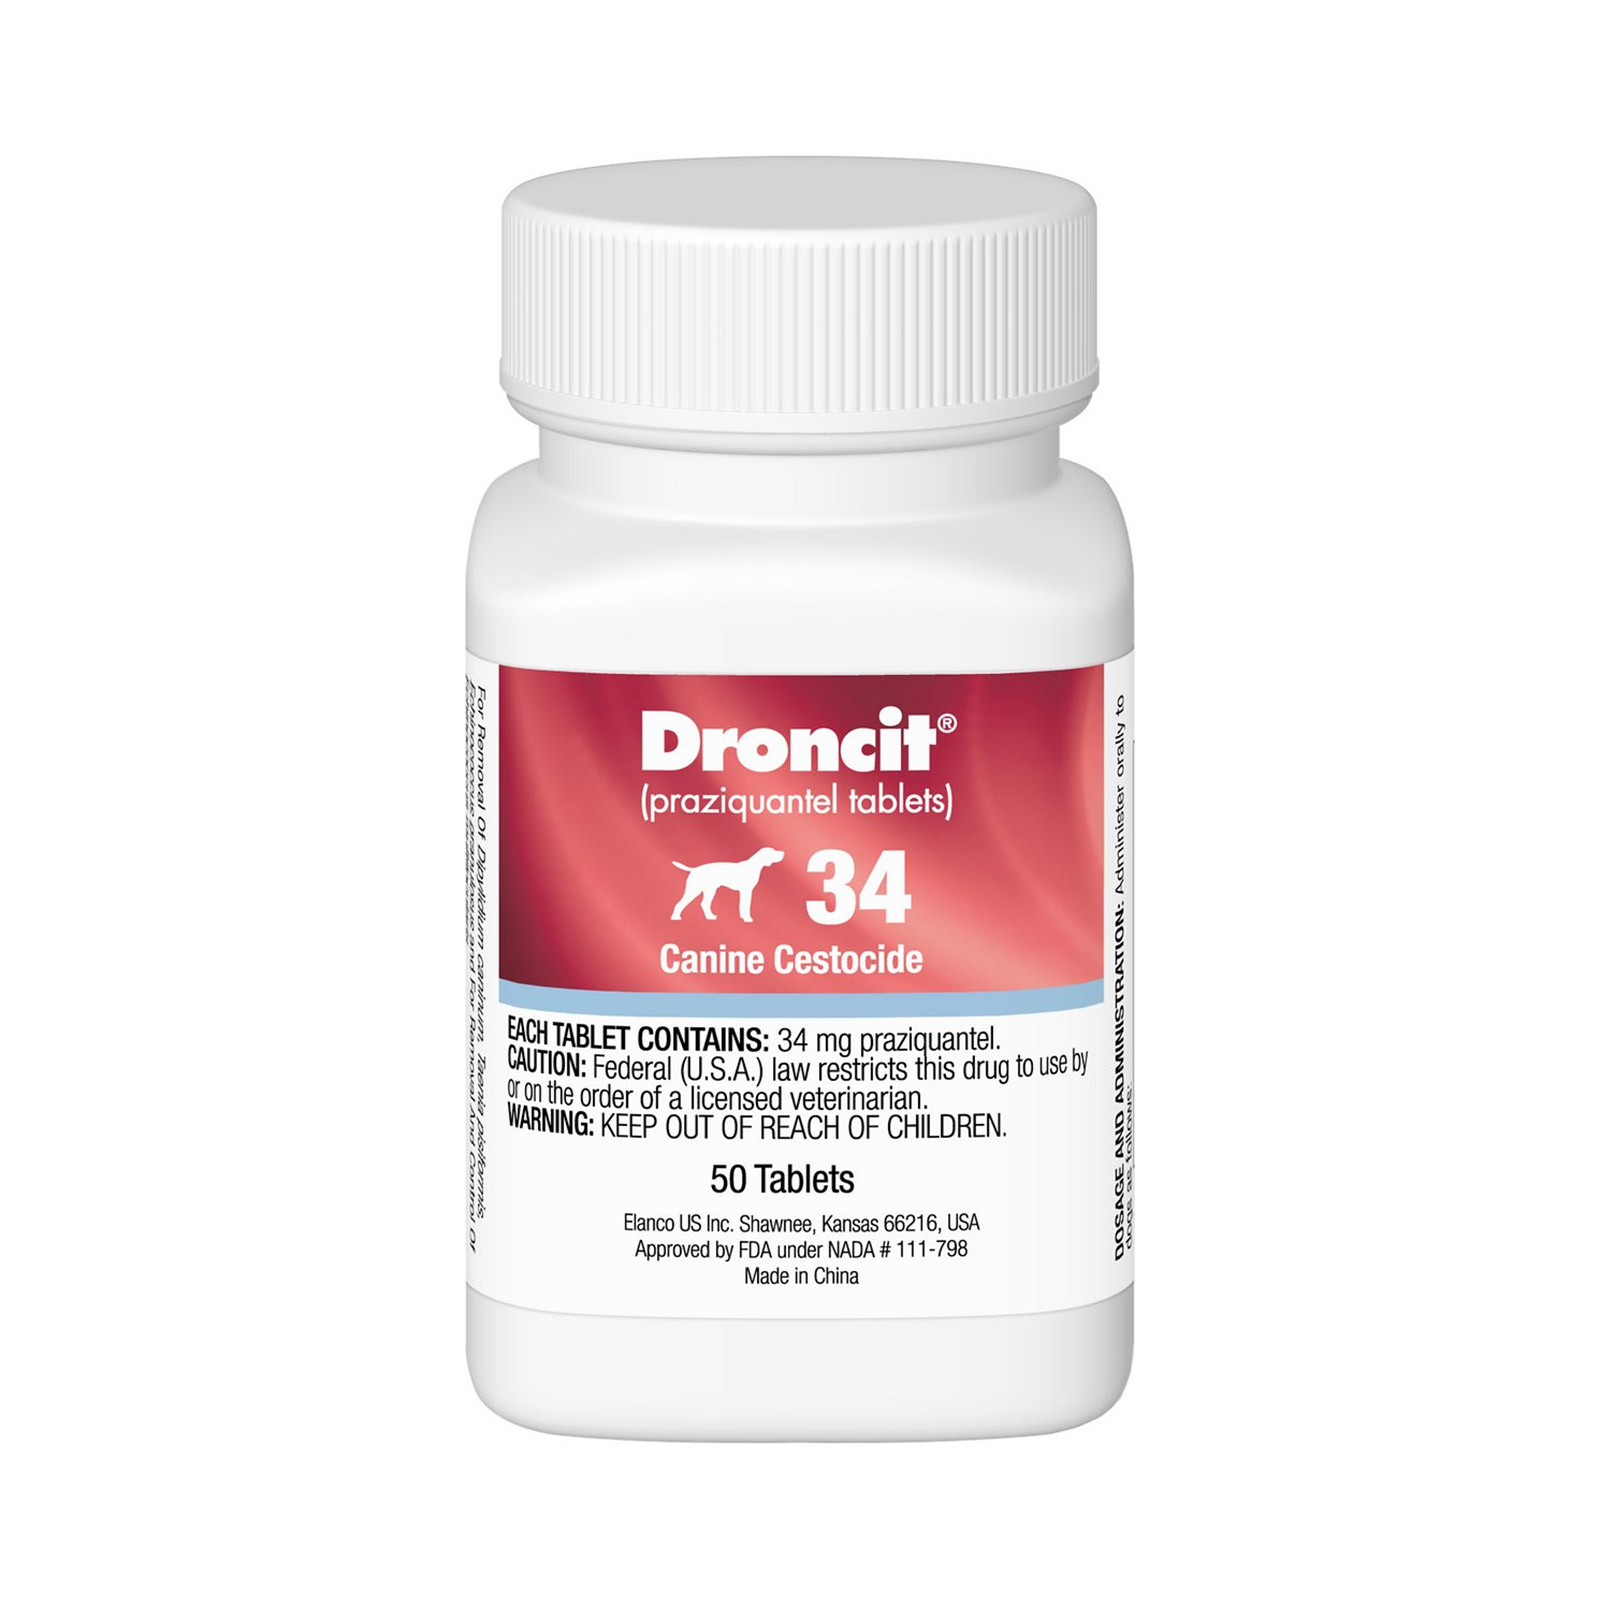 Droncit Tapewormer For Dogs 4 Tablets
